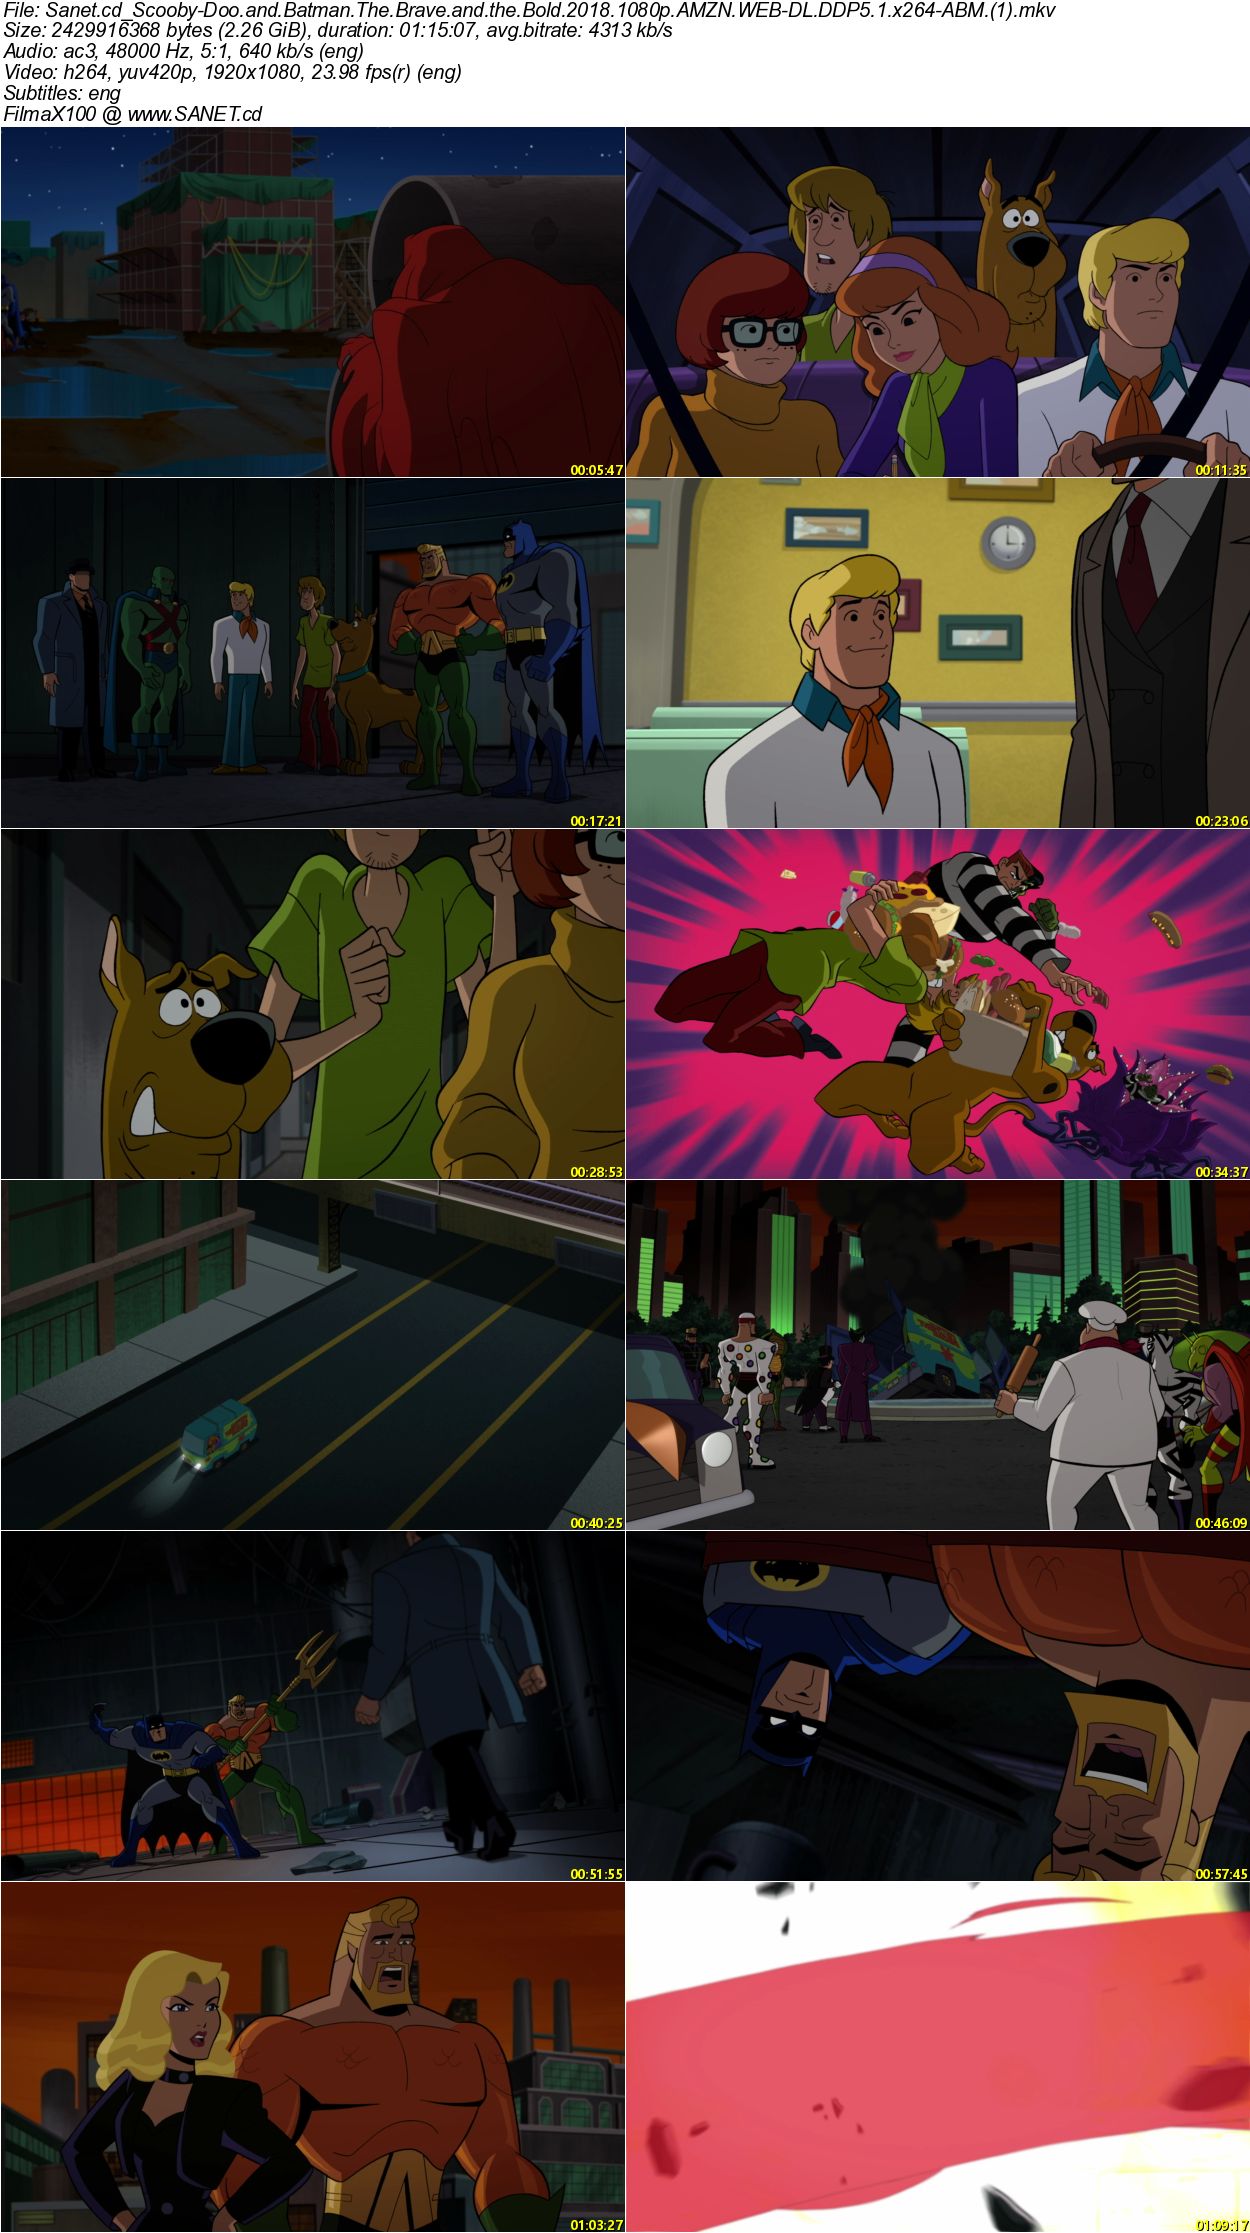 scooby doo and batman the brave and the bold